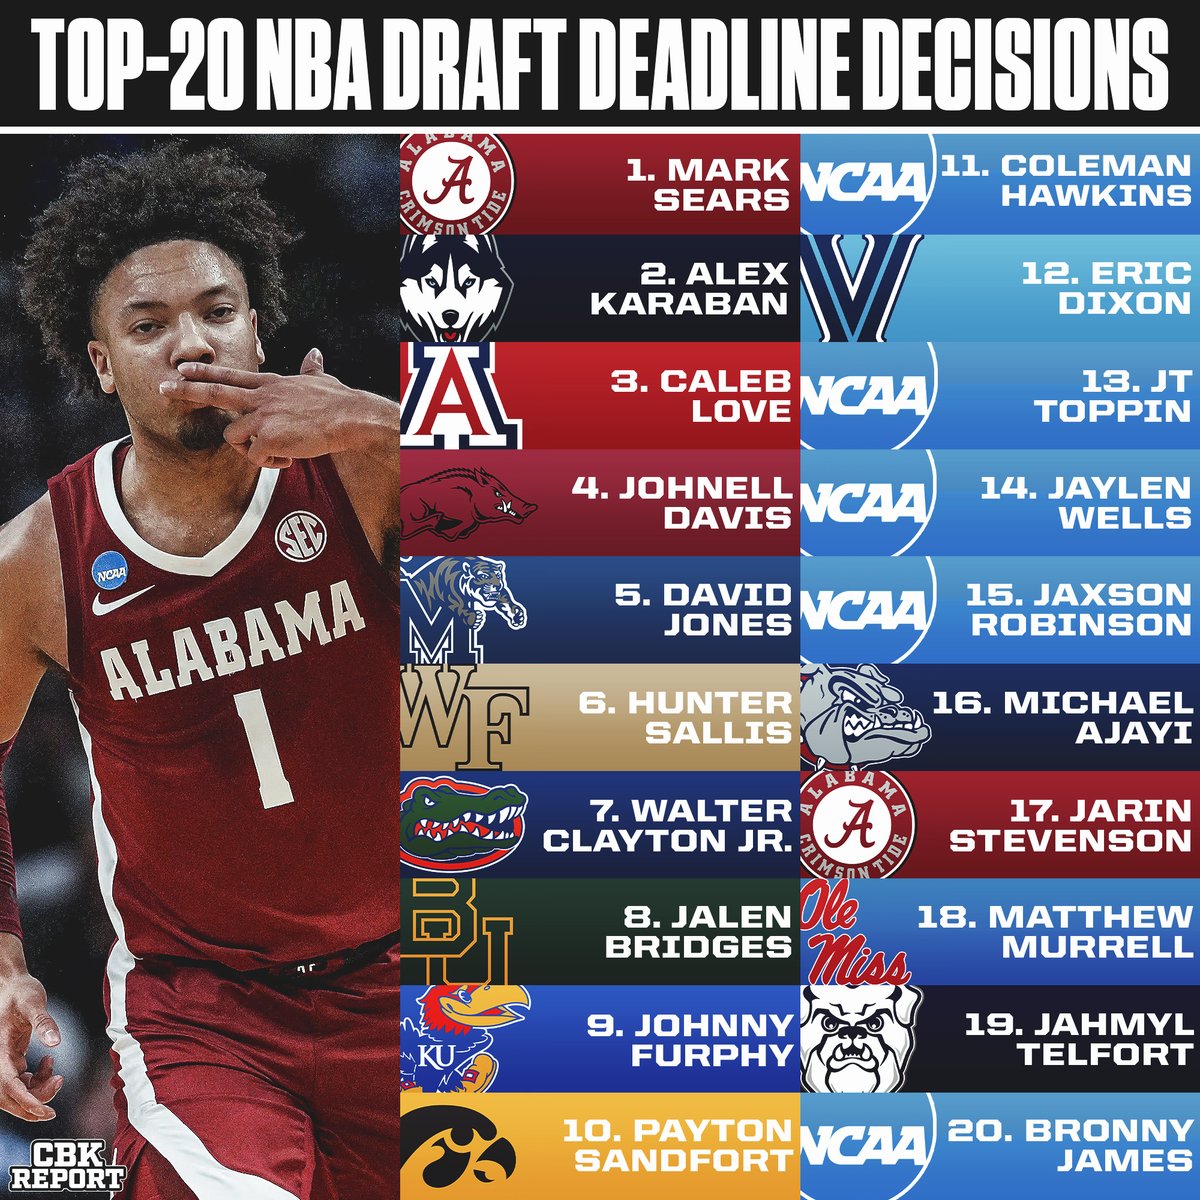 Ranking the 20 Most Important NBA Draft Deadline Decisions on the College Basketball Landscape🏀